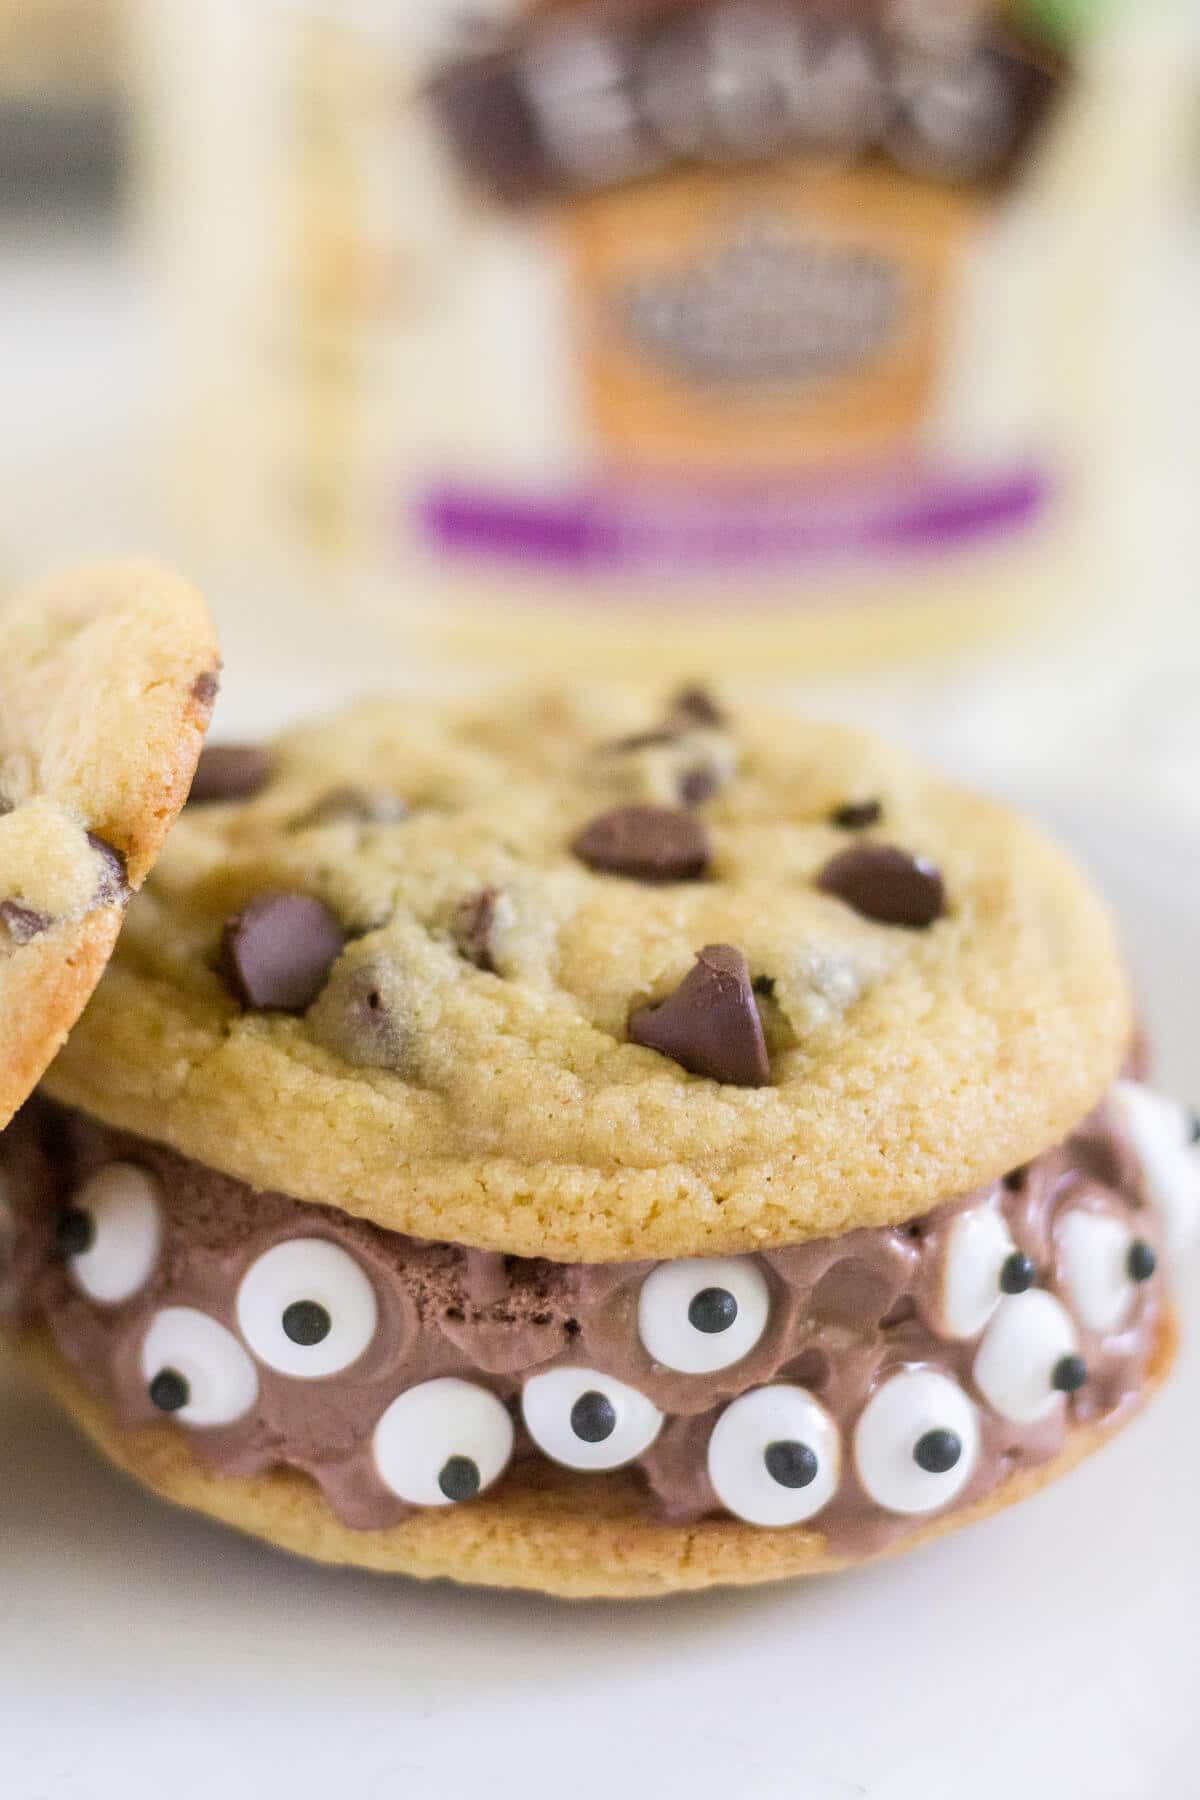 Spooky Monster Ice Cream Sandwiches are an easy Halloween treat for kids and adults alike! This Halloween recipe is a fun dessert for any spooky occasion, from a kid’s party to a trick-or-treating night in.